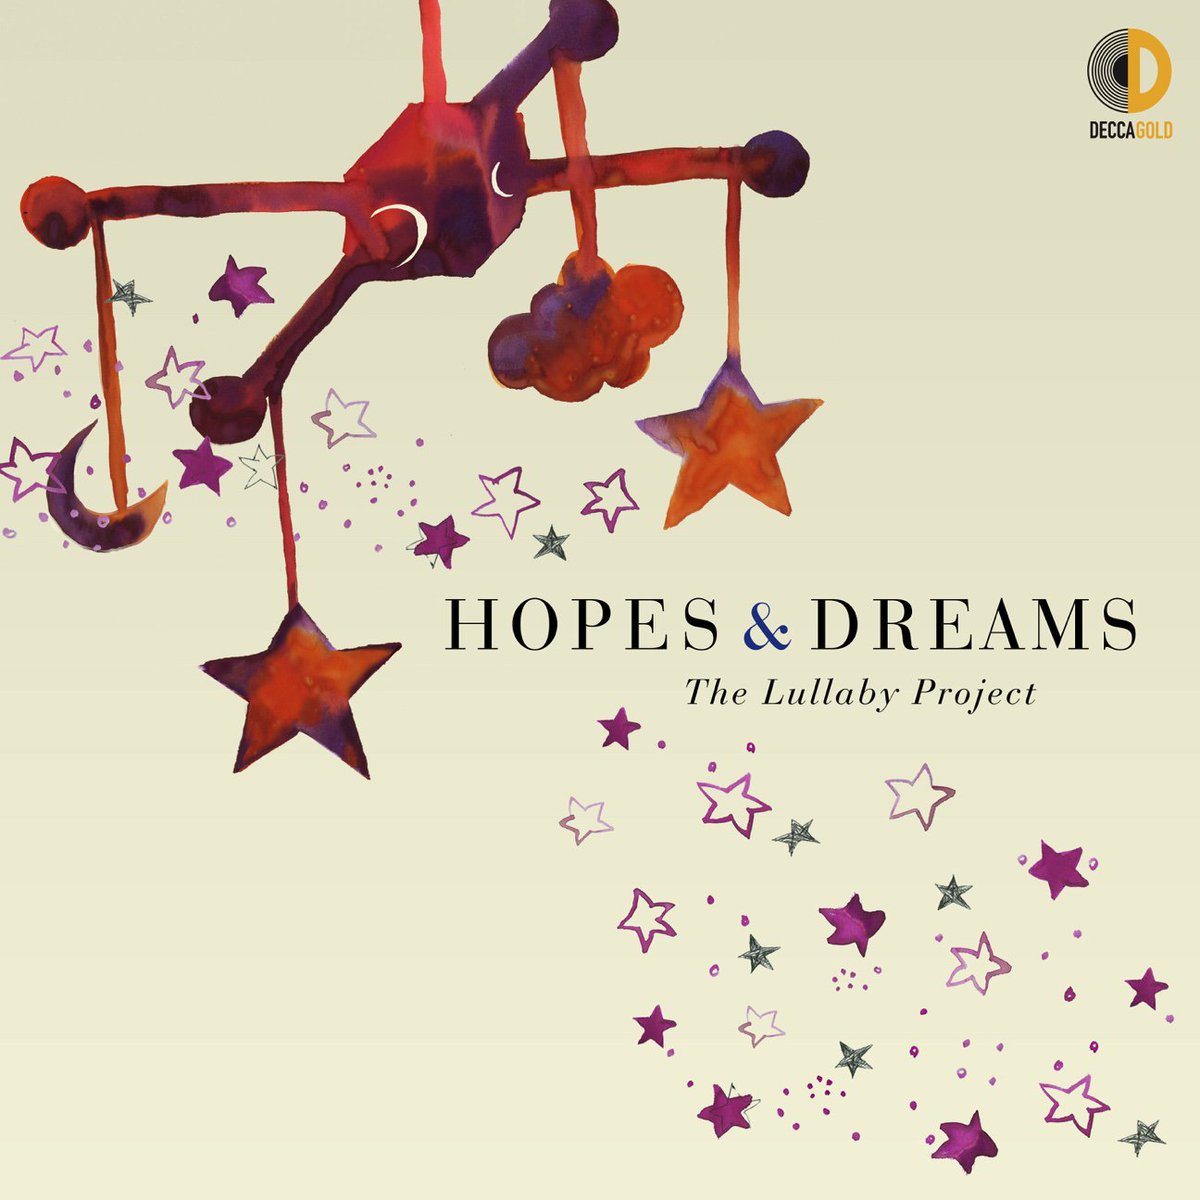 I am very excited to be featured on #HopesAndDreams, inspired by @carnegiehall's #LullabyProject. The album is a collection of lullabies, performed by wonderful artists, including @JoyceDiDonato and @PrettyYende. Listen to my song “Dream Big” at:

DeccaGold.lnk.to/HopesandDreams…